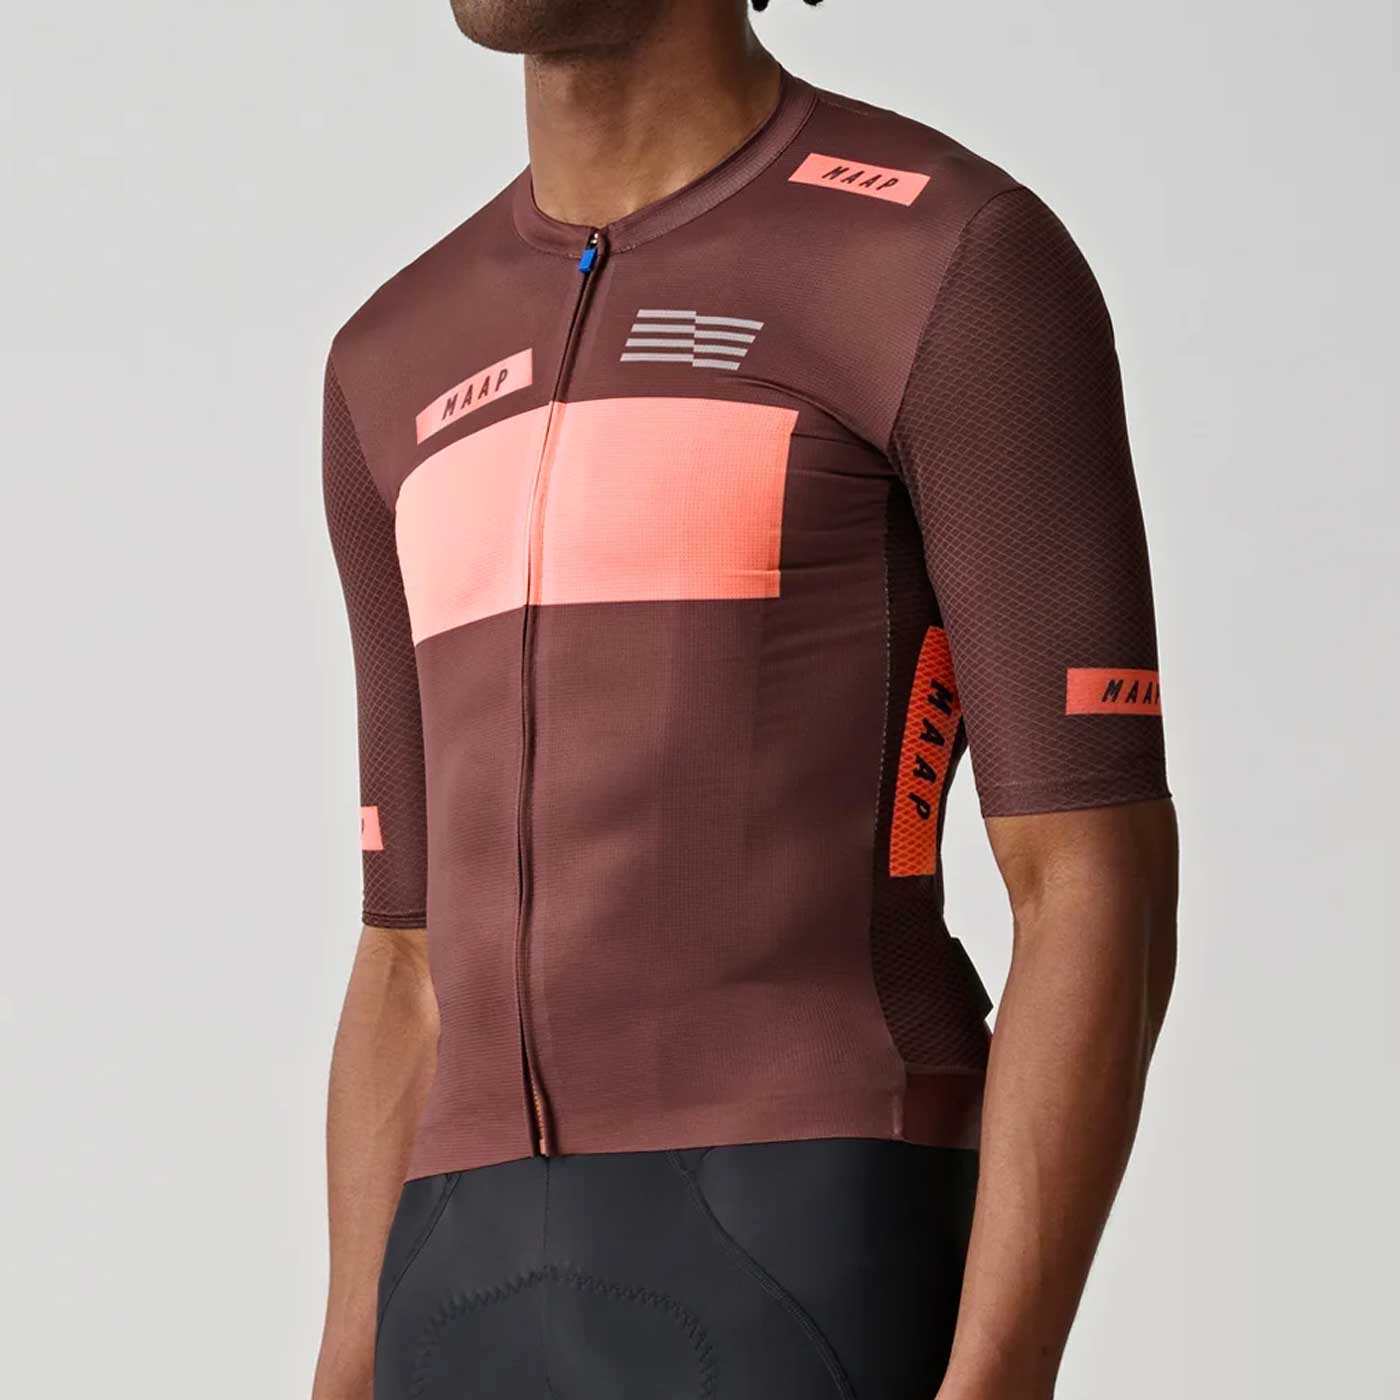 Maap System Pro Air jersey - Red | All4cycling